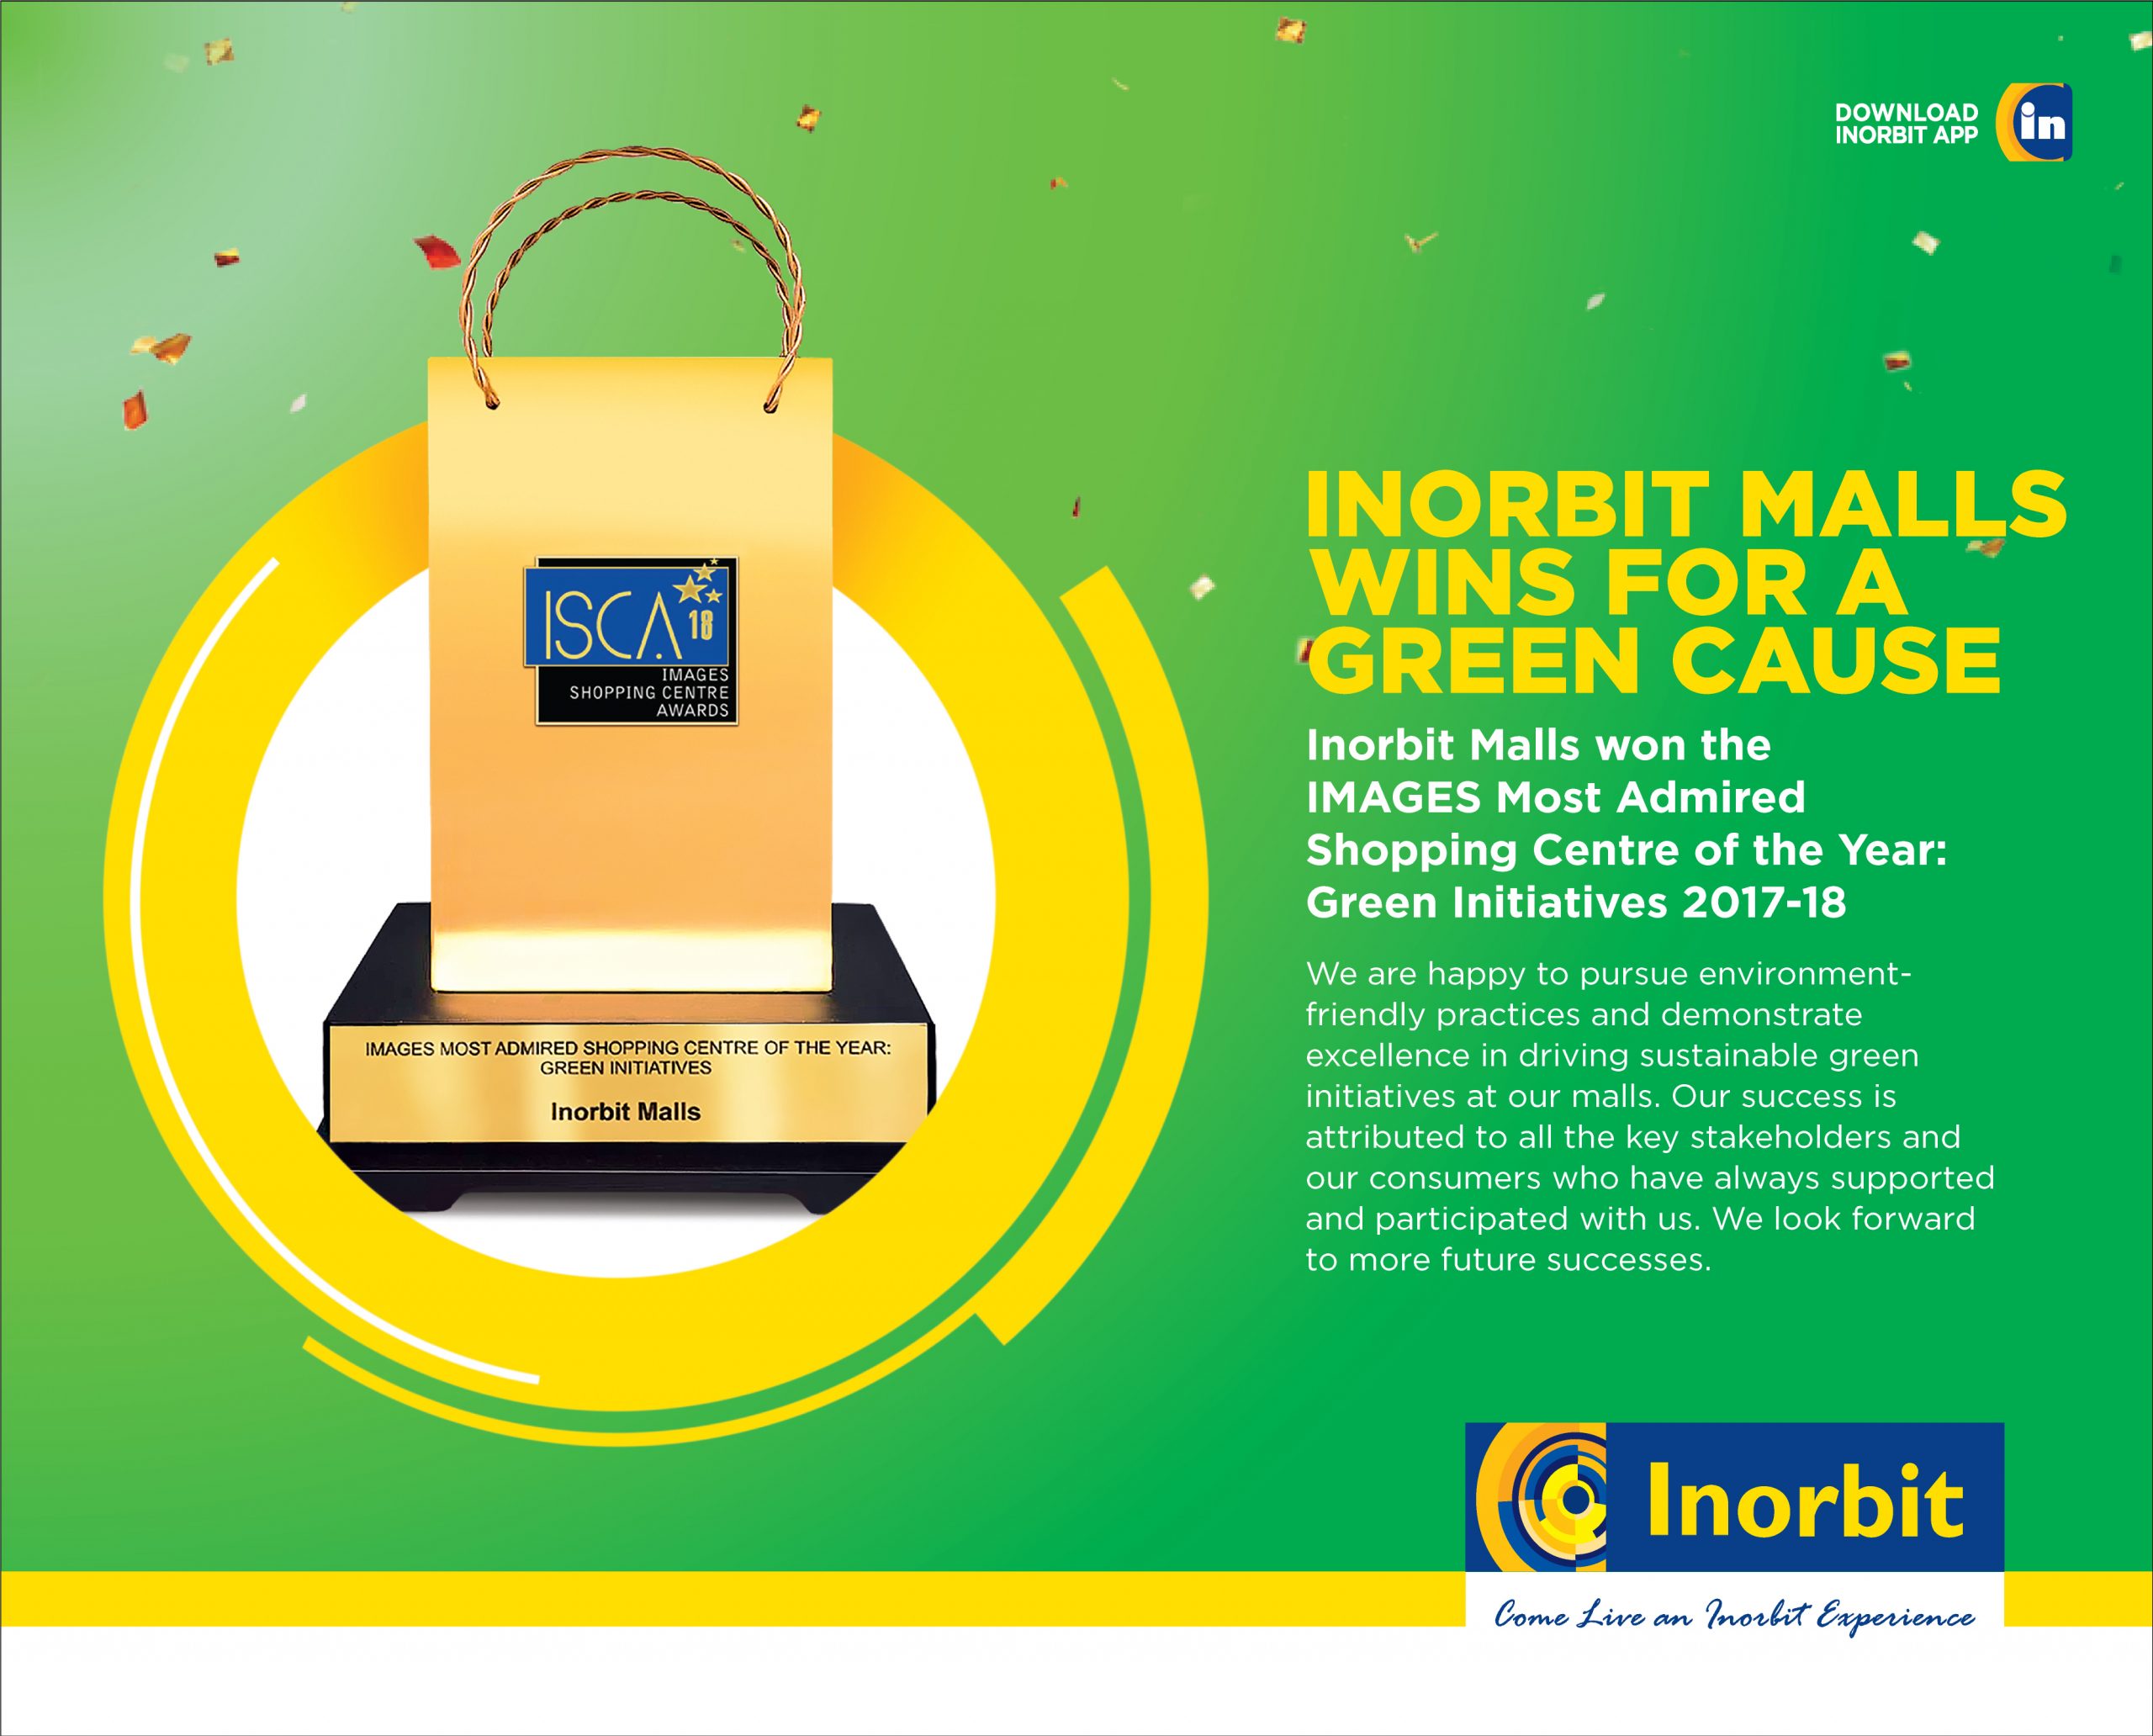 Images Most Admired Shopping Centre : Green Initiatives for Inorbit Malls